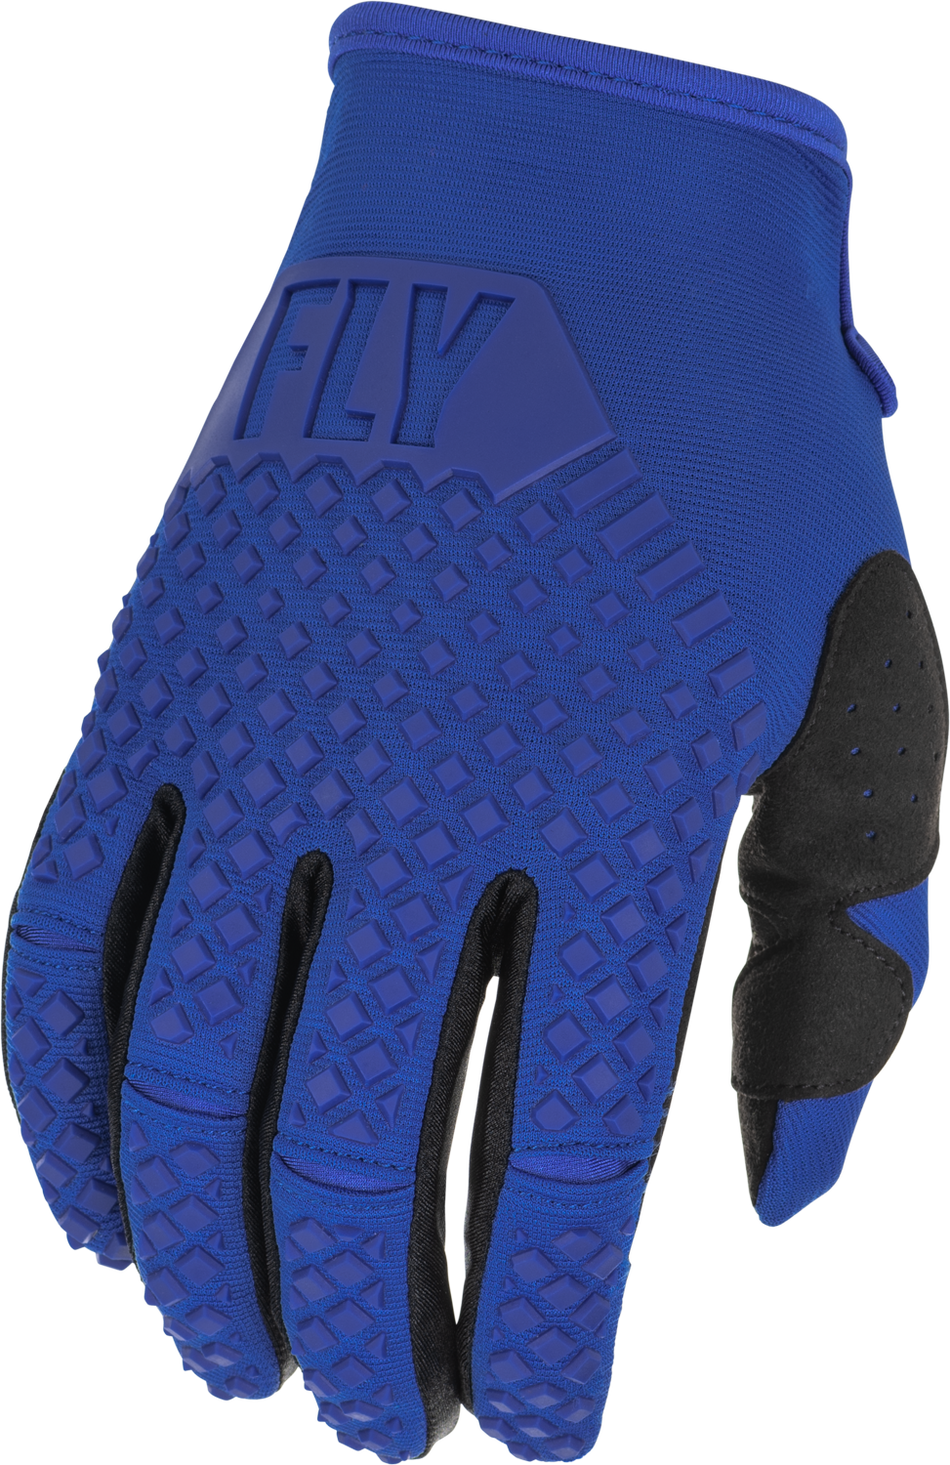 FLY RACING Kinetic Gloves Blue Lg 375-411L